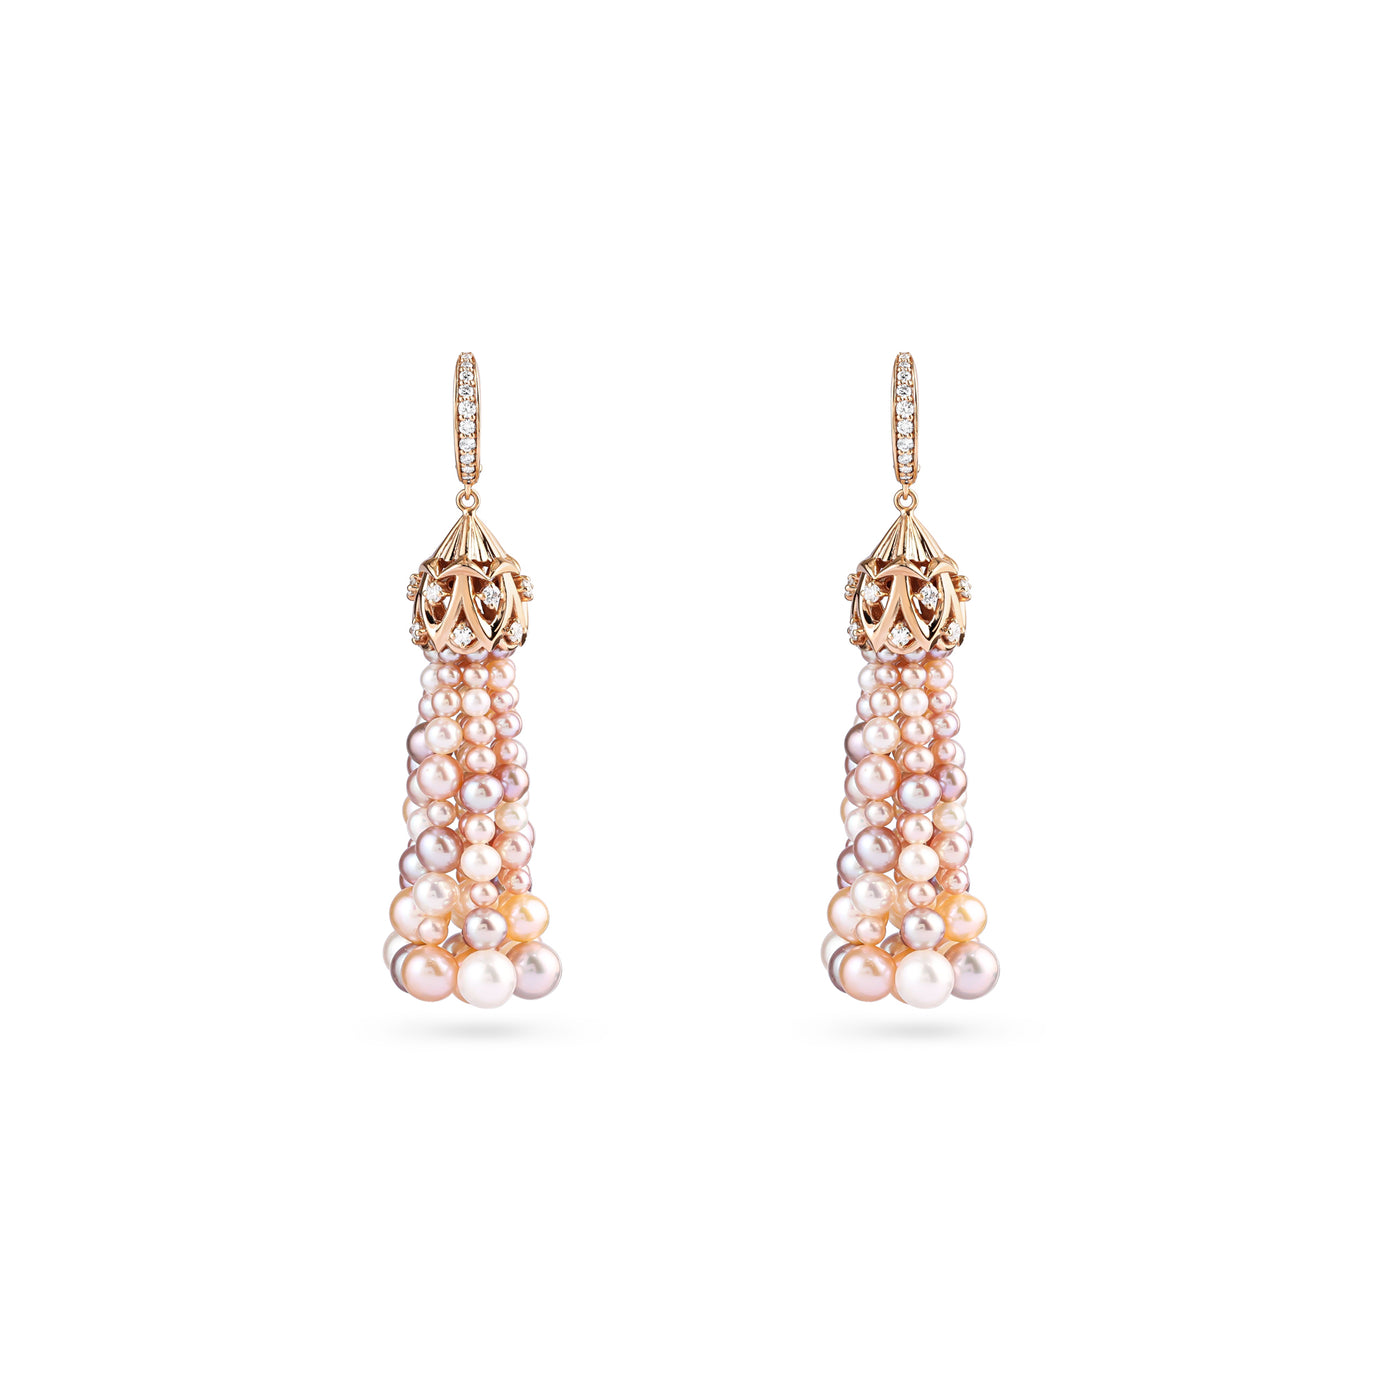 Rose Gold Diamond Earring with Colored Pearls